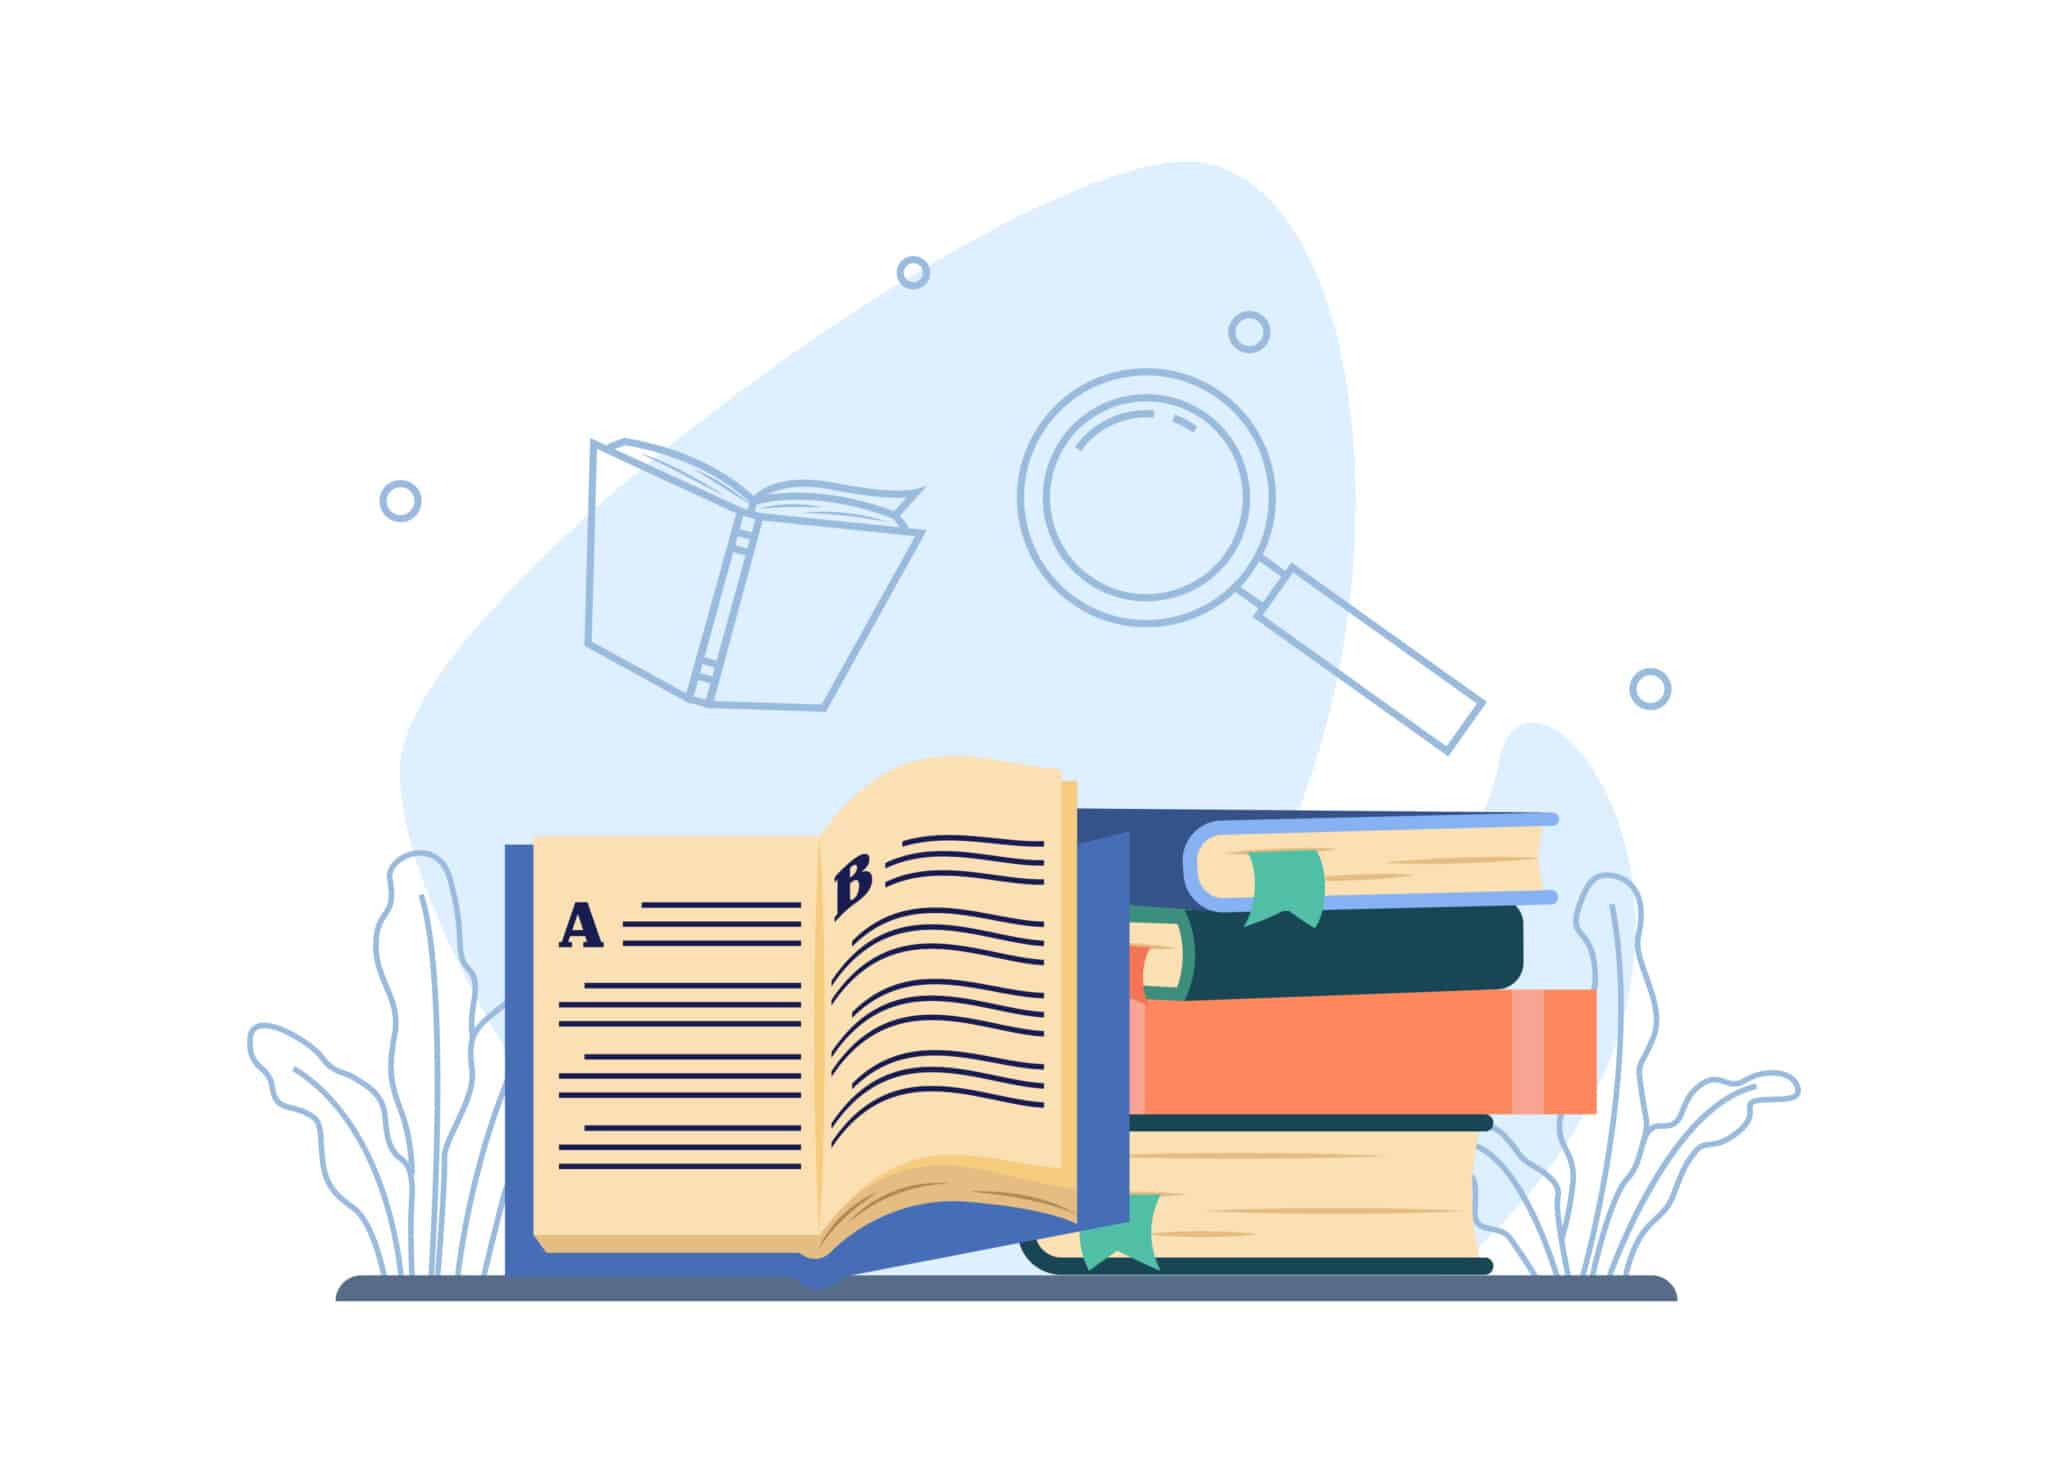 A vector graphic showing an open book next to a pile of closed books